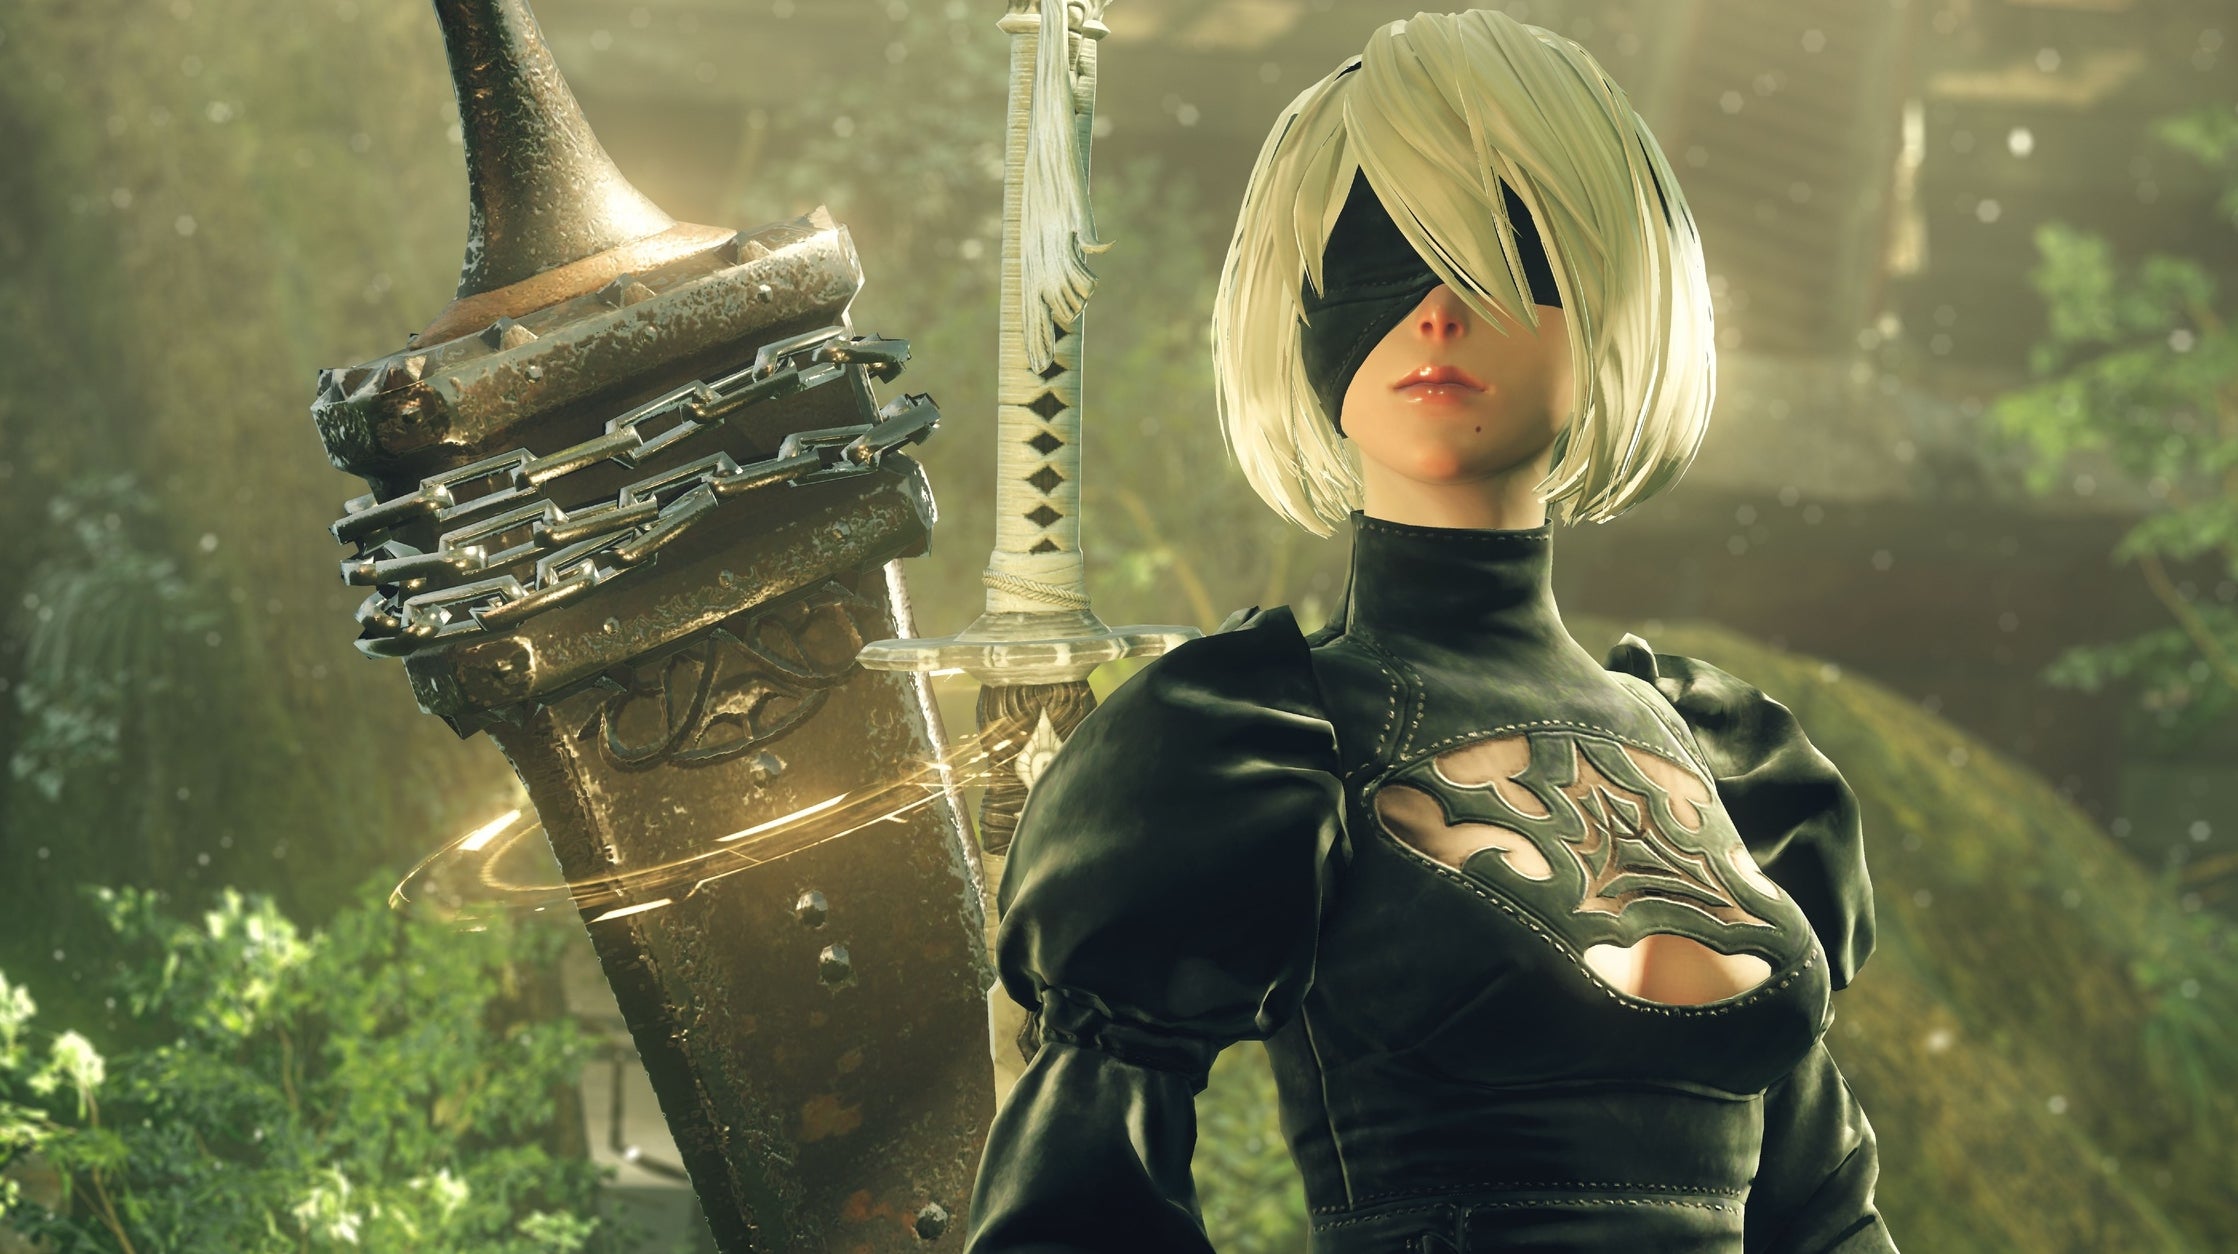 NieR:Automata Ver1.1a TV Anime Returns on July 23 With Four New Episodes -  Crunchyroll News